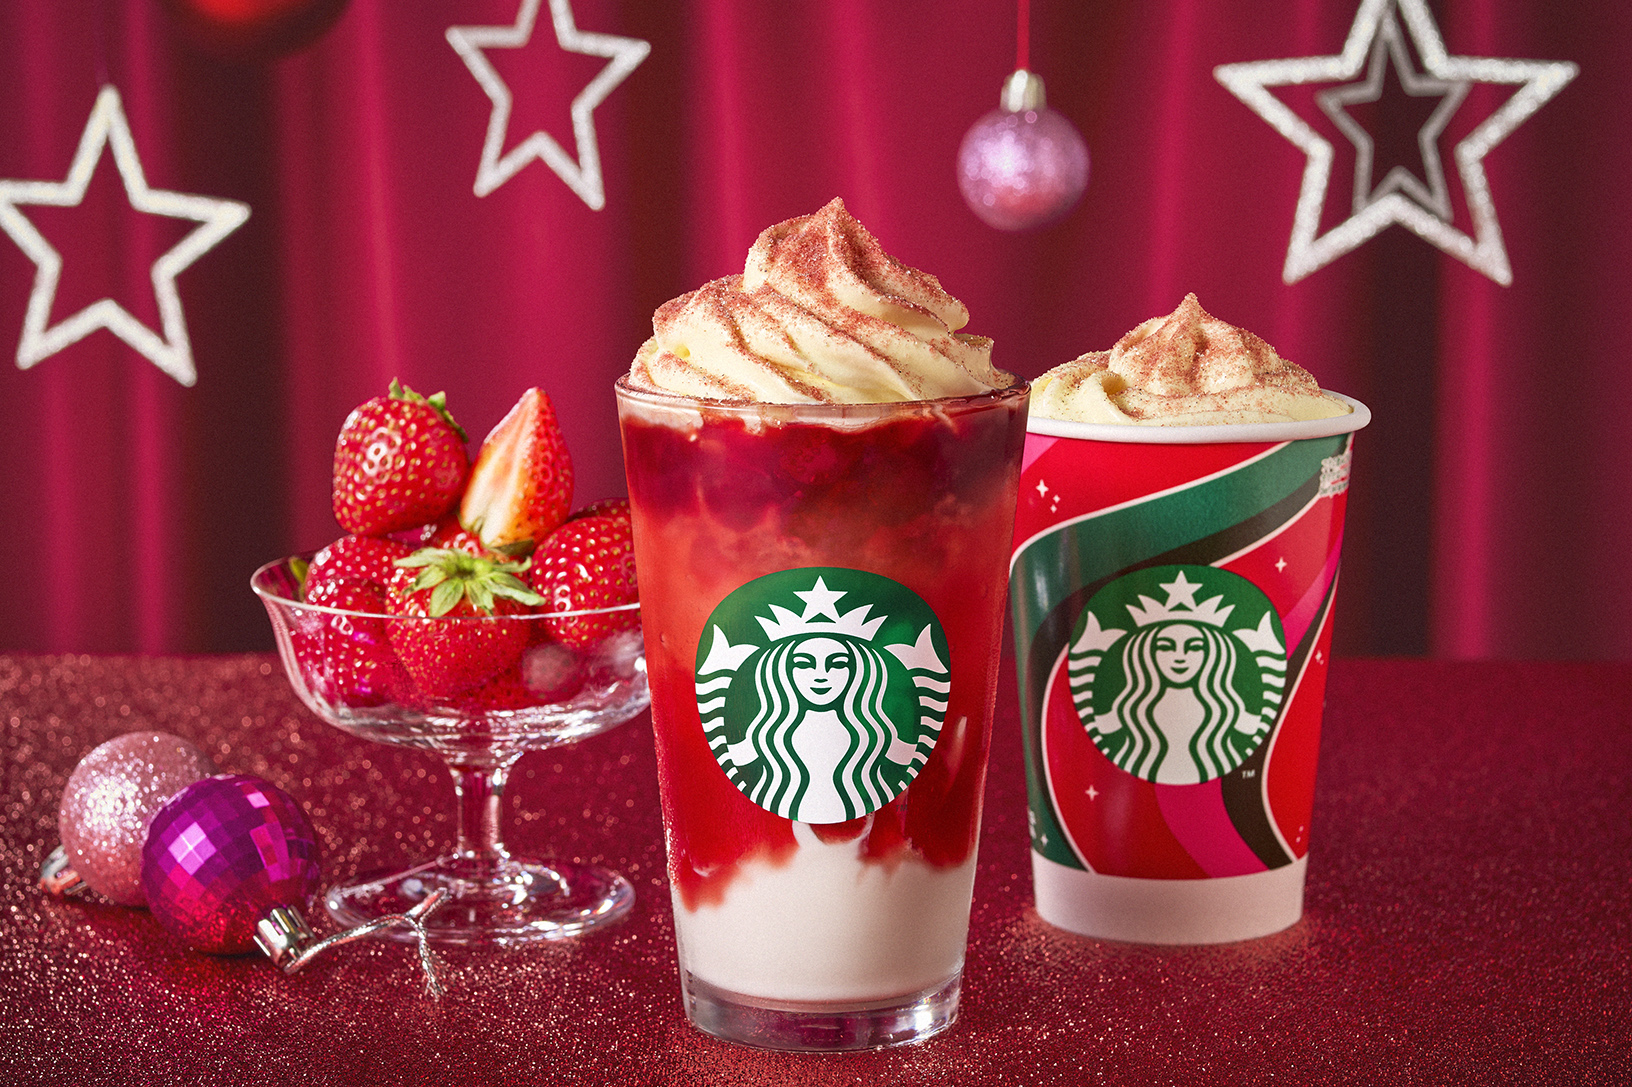 https://soranews24.com/wp-content/uploads/sites/3/2023/10/Starbucks-Japan-Christmas-Frappuccino-Holiday-2023-new-limited-edition-exclusive-drink-gingerbread-latte-photos-1.jpg